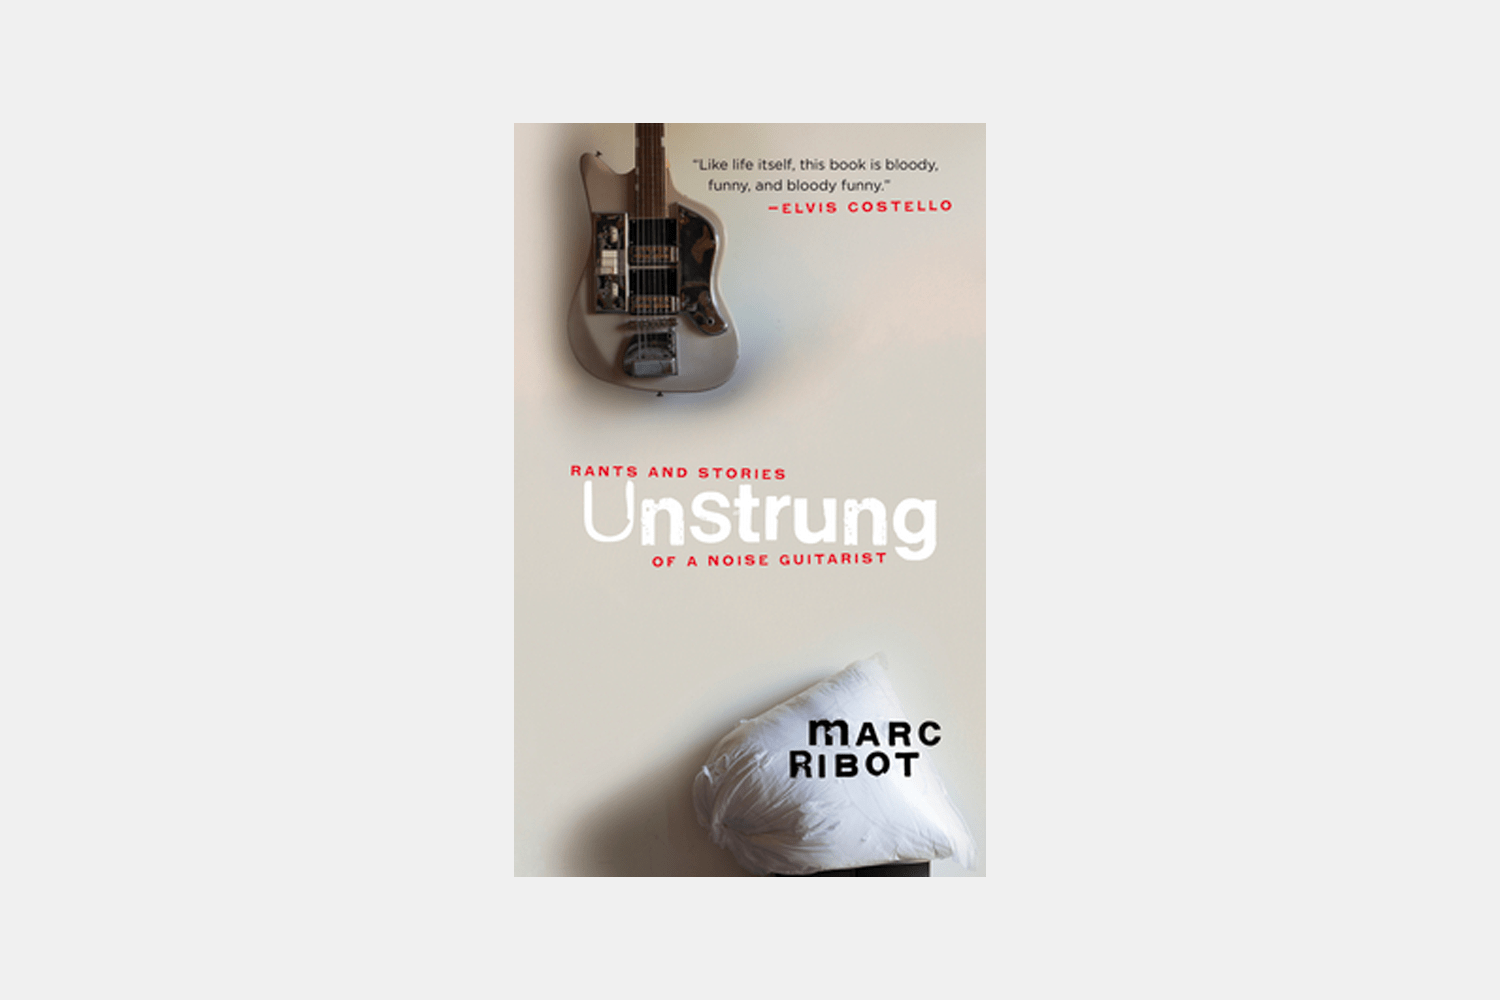     Unstrung: Rants and Stories of a Noise Guitarist